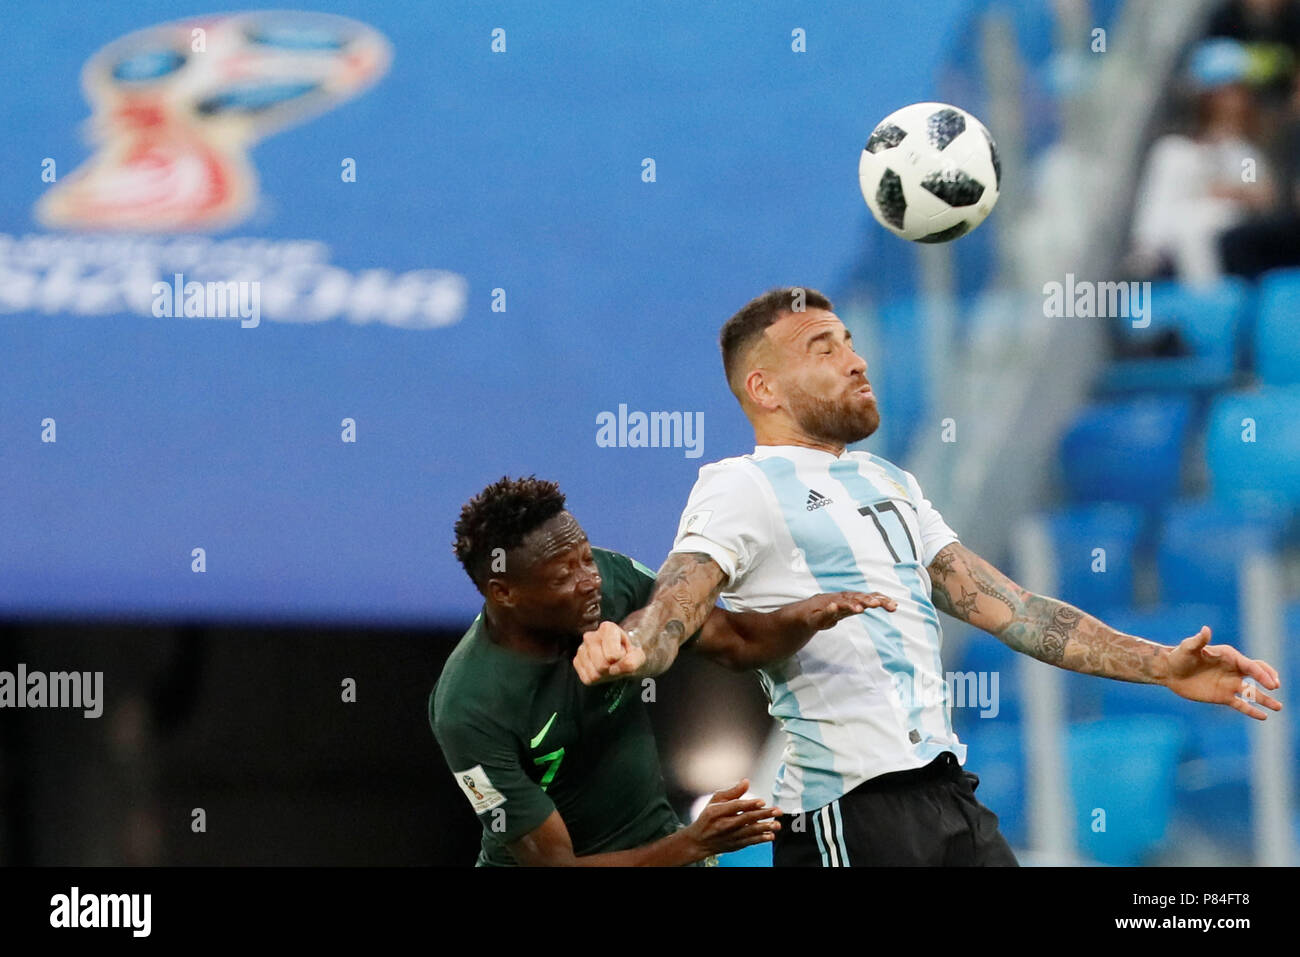 SAINT PETERSBURG, RUSSIA - JUNE 26: Ahmed Musa (L) of Nigeria national team and Nicolas Otamendi of Argentina national team vie for a header during the 2018 FIFA World Cup Russia group D match between Nigeria and Argentina at Saint Petersburg Stadium on June 26, 2018 in Saint Petersburg, Russia. (MB Media) Stock Photo